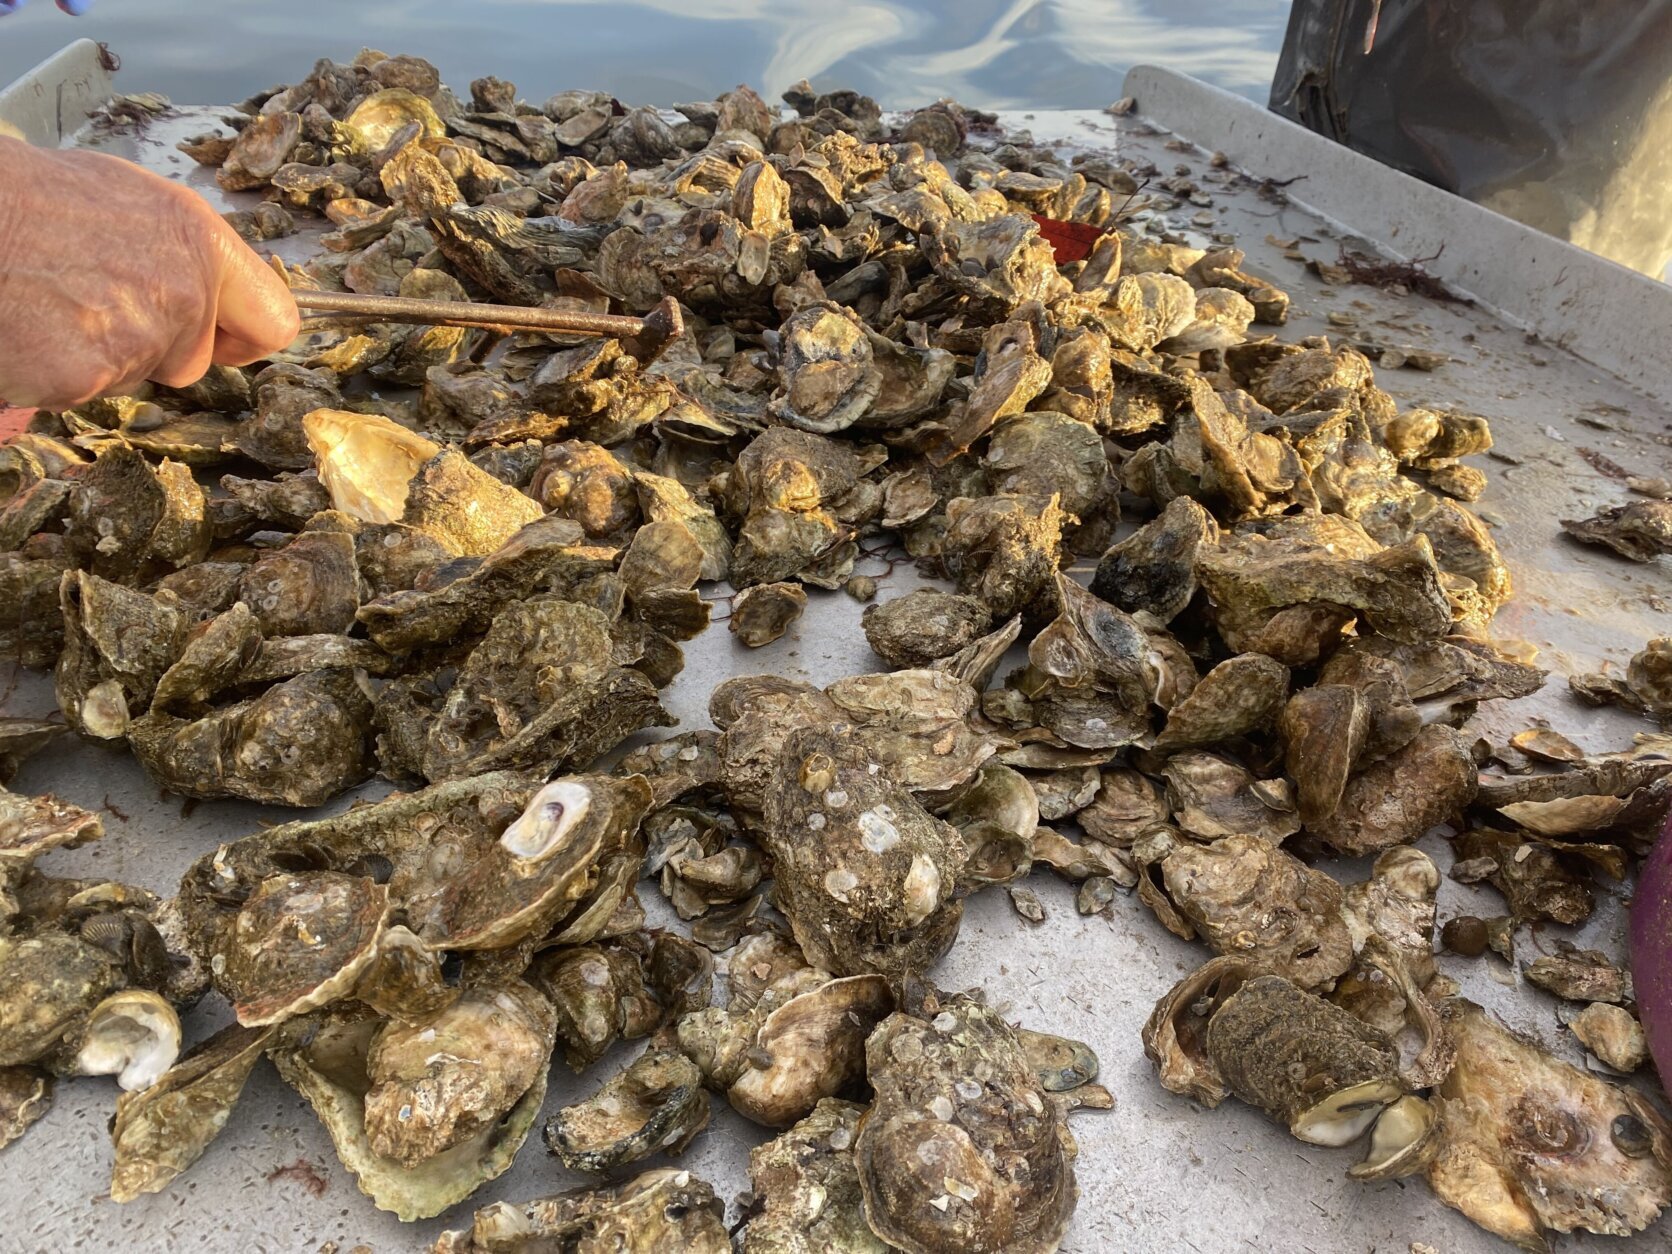 <p>Brown, who is also the president of the Maryland Watermen’s Association, said the repeated rainfall that’s drenched the mid-Atlantic the past couple of months will reduce that salinity at a time when oysters need that to boost their immune system and avoid disease.</p>
<p>But just when supplies are rising, demand appears to be waning, meaning Maryland’s watermen are making less money than they used to.</p>
<p>“Well, it&#8217;s very simple. I think seafood is a luxury,” Brown said.</p>
<p>Even though many economic indicators are and have been positive for a while, it doesn’t mean people haven’t been wary about spending on certain things. And Brown said at the grocery store the amount of chicken or beef you can get for $35 goes a lot further than the amount of oysters you can get for $35. That’s sent the price of a bushel of oysters from $45-50 down to around $35.</p>
<p>“When you&#8217;re down that much on your sales, that&#8217;s your gross, that&#8217;s where you profit is,” Brown said. “Your profit is not in the first bushel you catch, it&#8217;s in the last bushel you catch because you know you got to keep the boots up, the equipment up.&#8221;</p>
